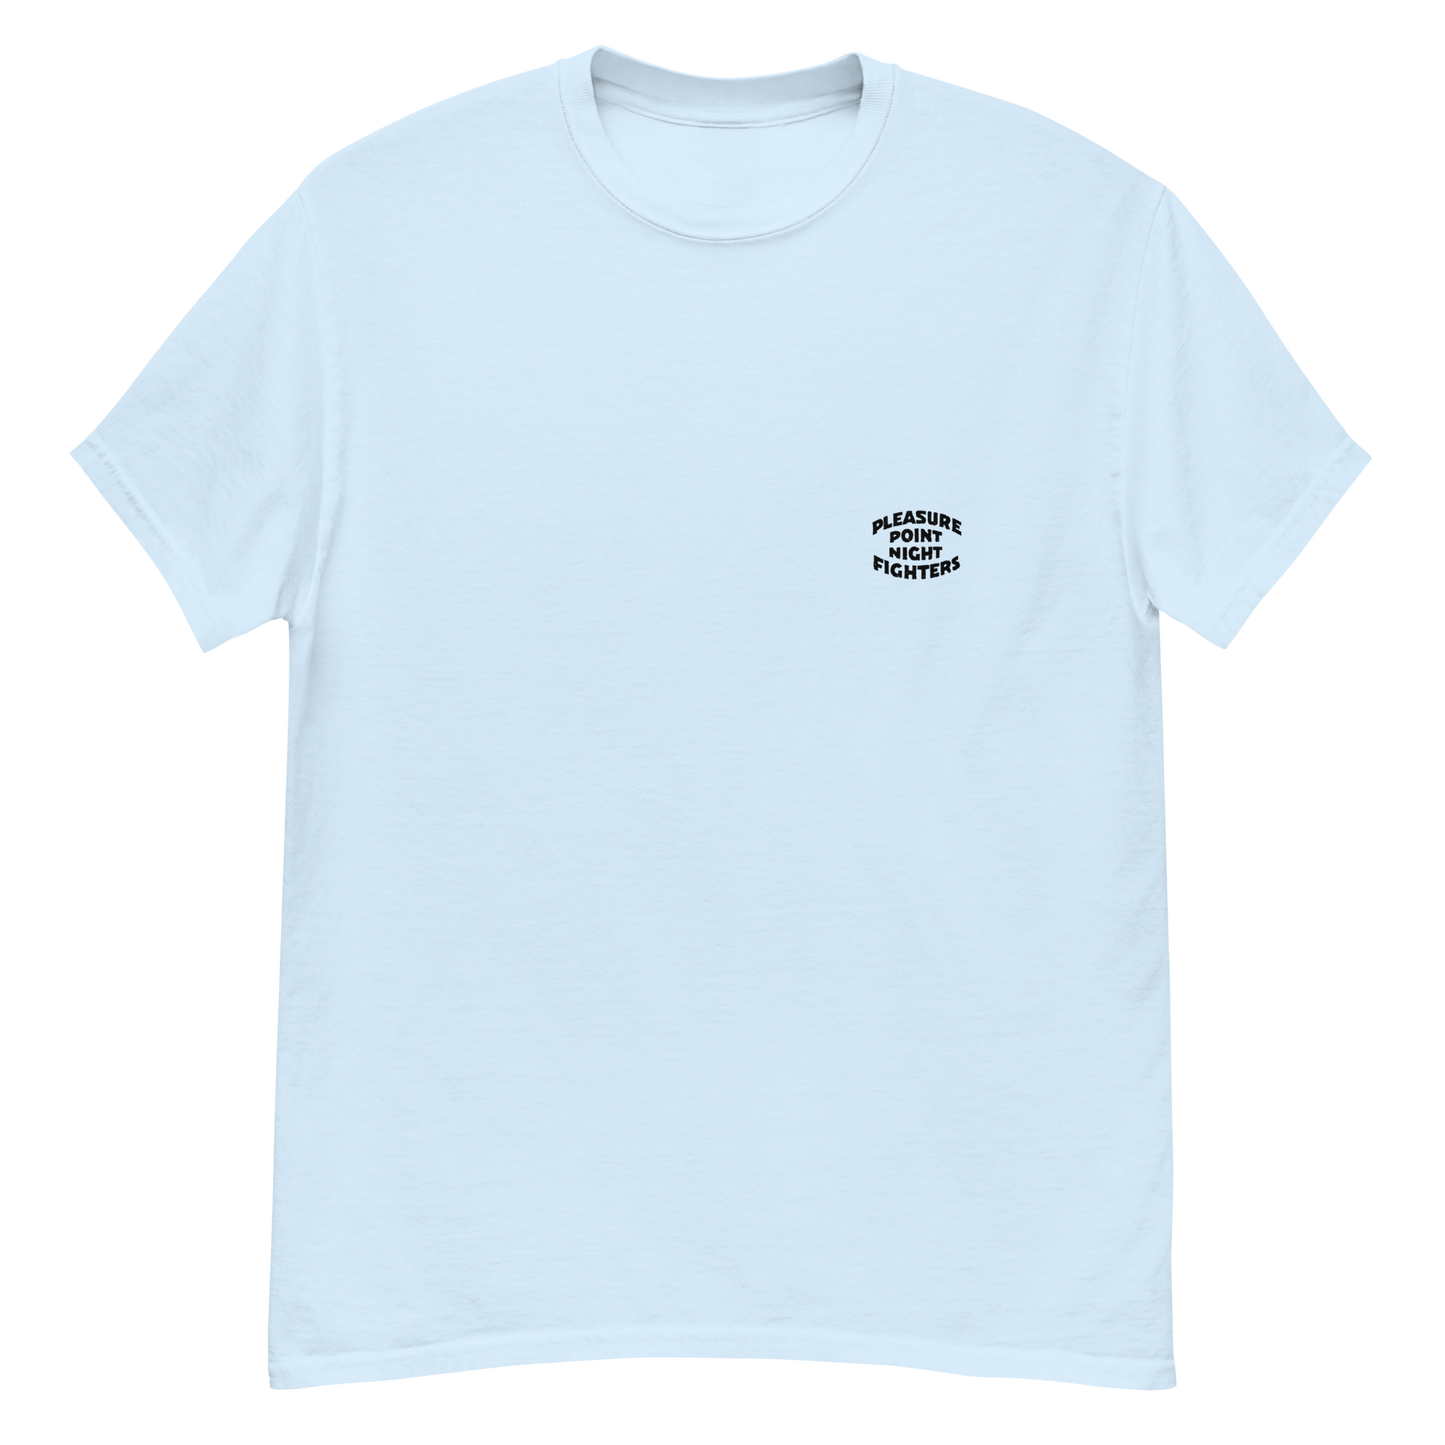 Jim Wales - Pro Model - Cutom Phillips Whales BACK -PPNF Front Men's classic tee